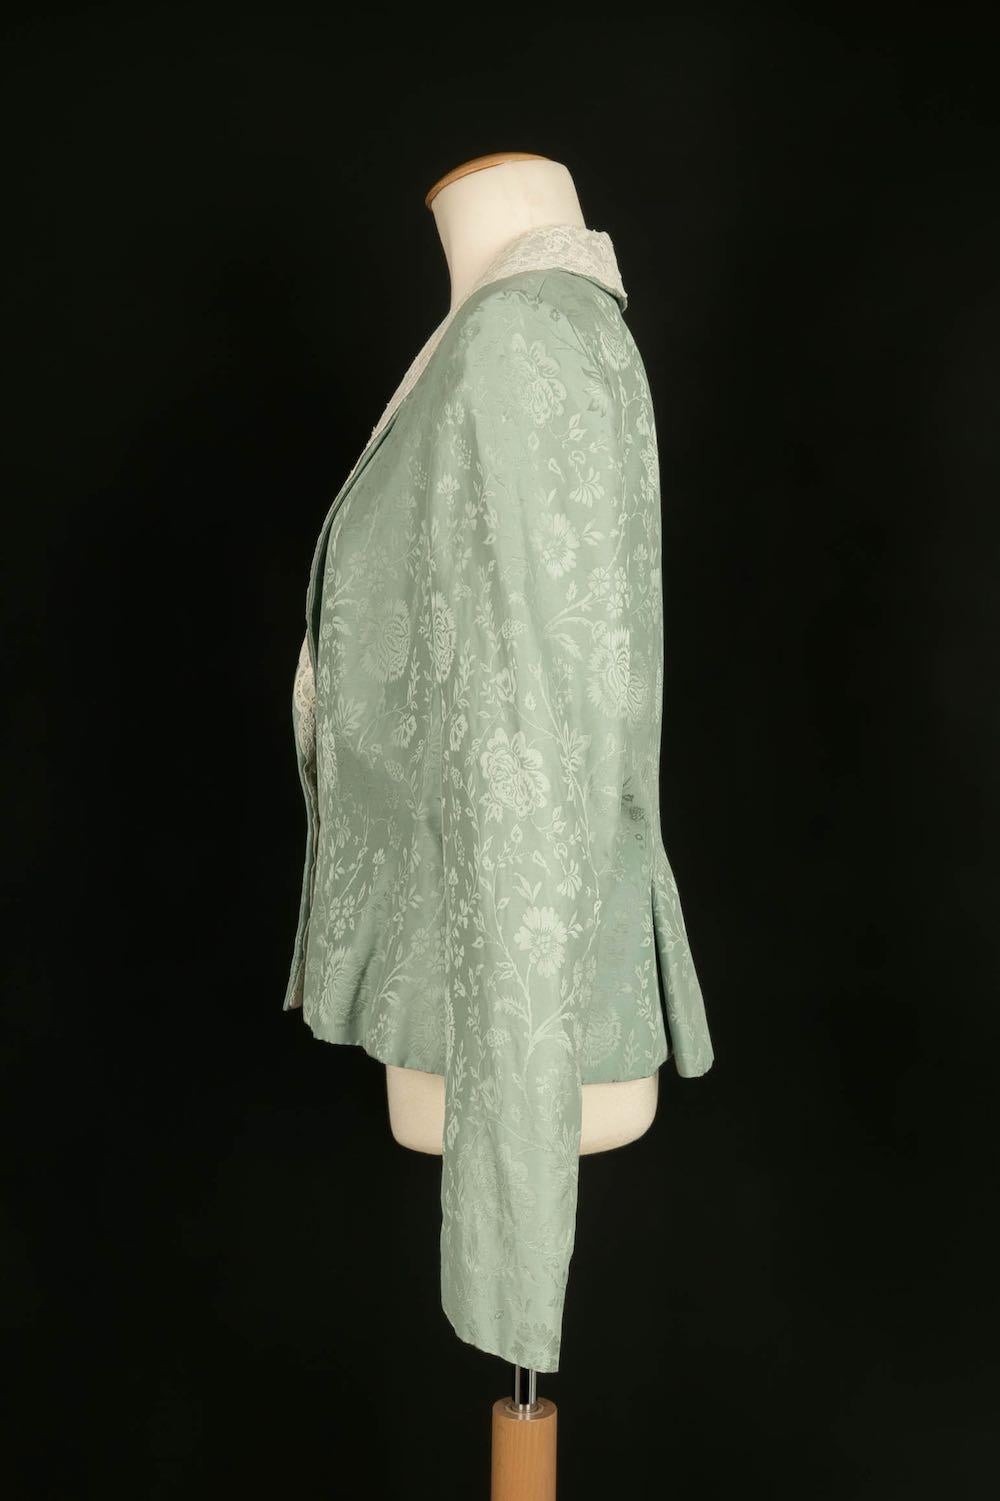 Dior - (Made in France) Green and white jacket with lace trim. Marked size 46FR.

Additional information: 
Dimensions: Shoulder width: 48 cm, Chest: 51 cm, Sleeve length: 61 cm, Length: 55 cm
Condition: Very good condition
Seller Ref number: FV56